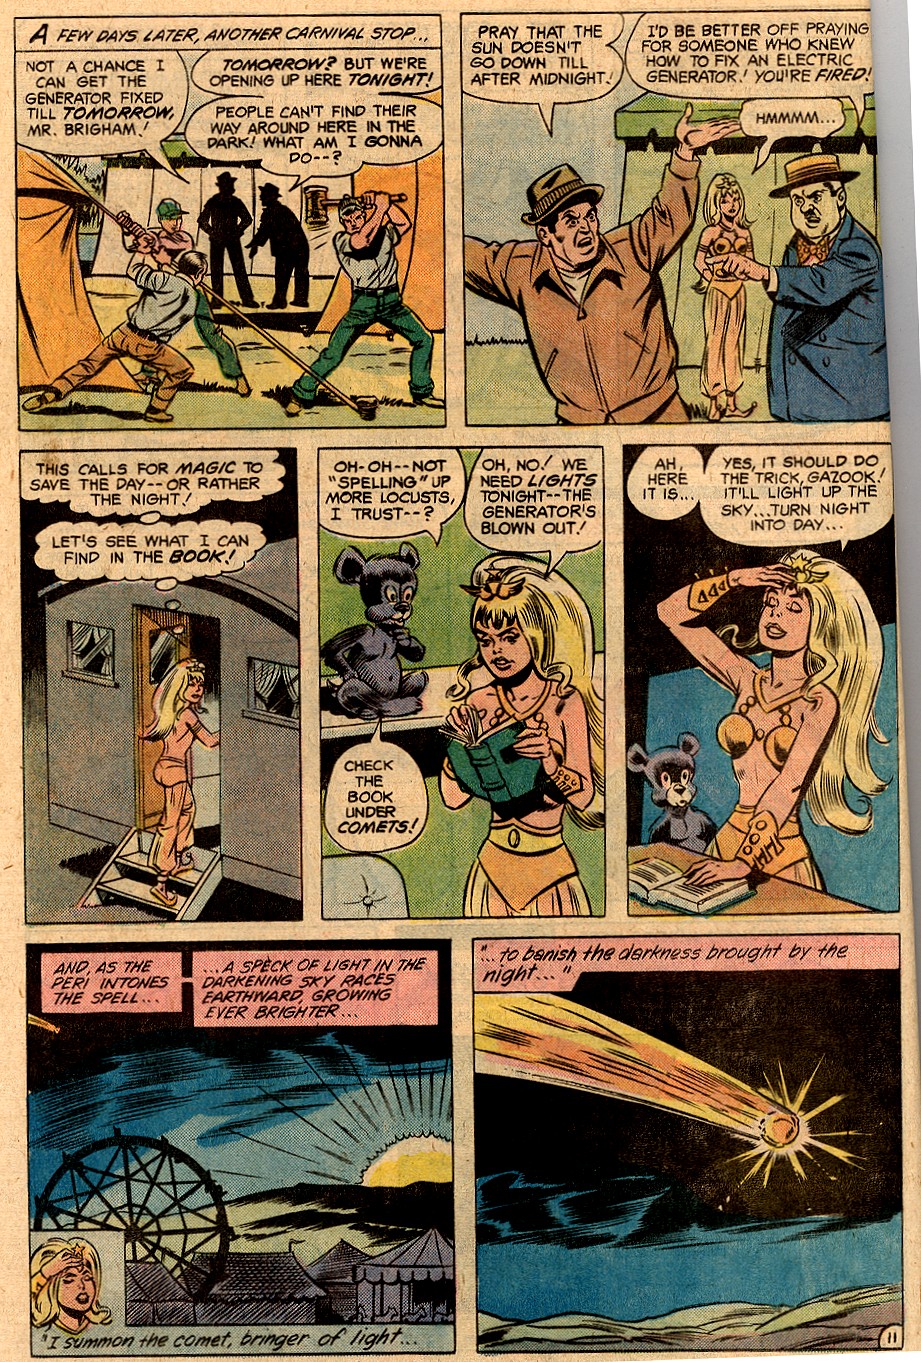 The New Adventures of Superboy 34 Page 15